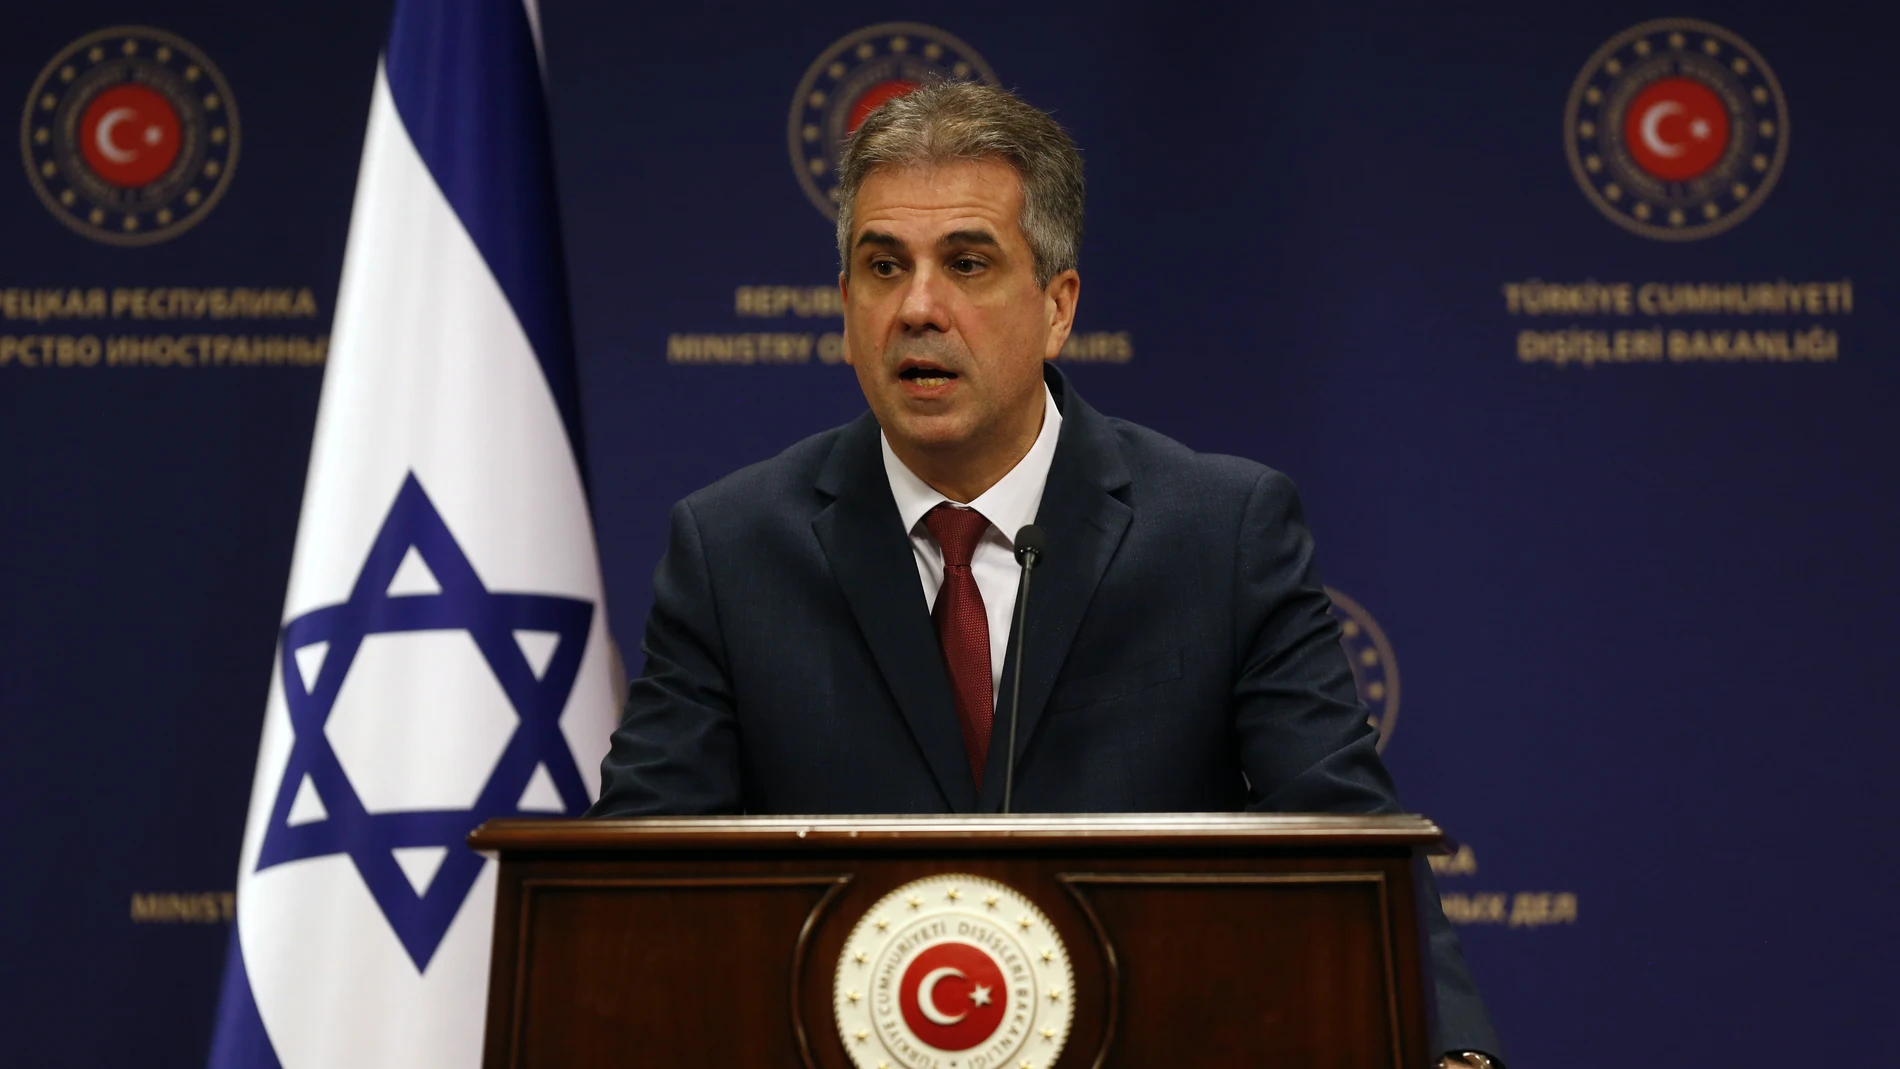 Ankara (Turkey), 14/02/2023.- Israel's Foreign Minister Eli Cohen attends a joint press conference with his Turkish counterpart after their meeting in Ankara, Turkey, 14 February 2023. Cohen visits Turkey due to the earthquakes in the southeast of Turkey. (Terremoto/sismo, Turquía) EFE/EPA/NECATI SAVAS 